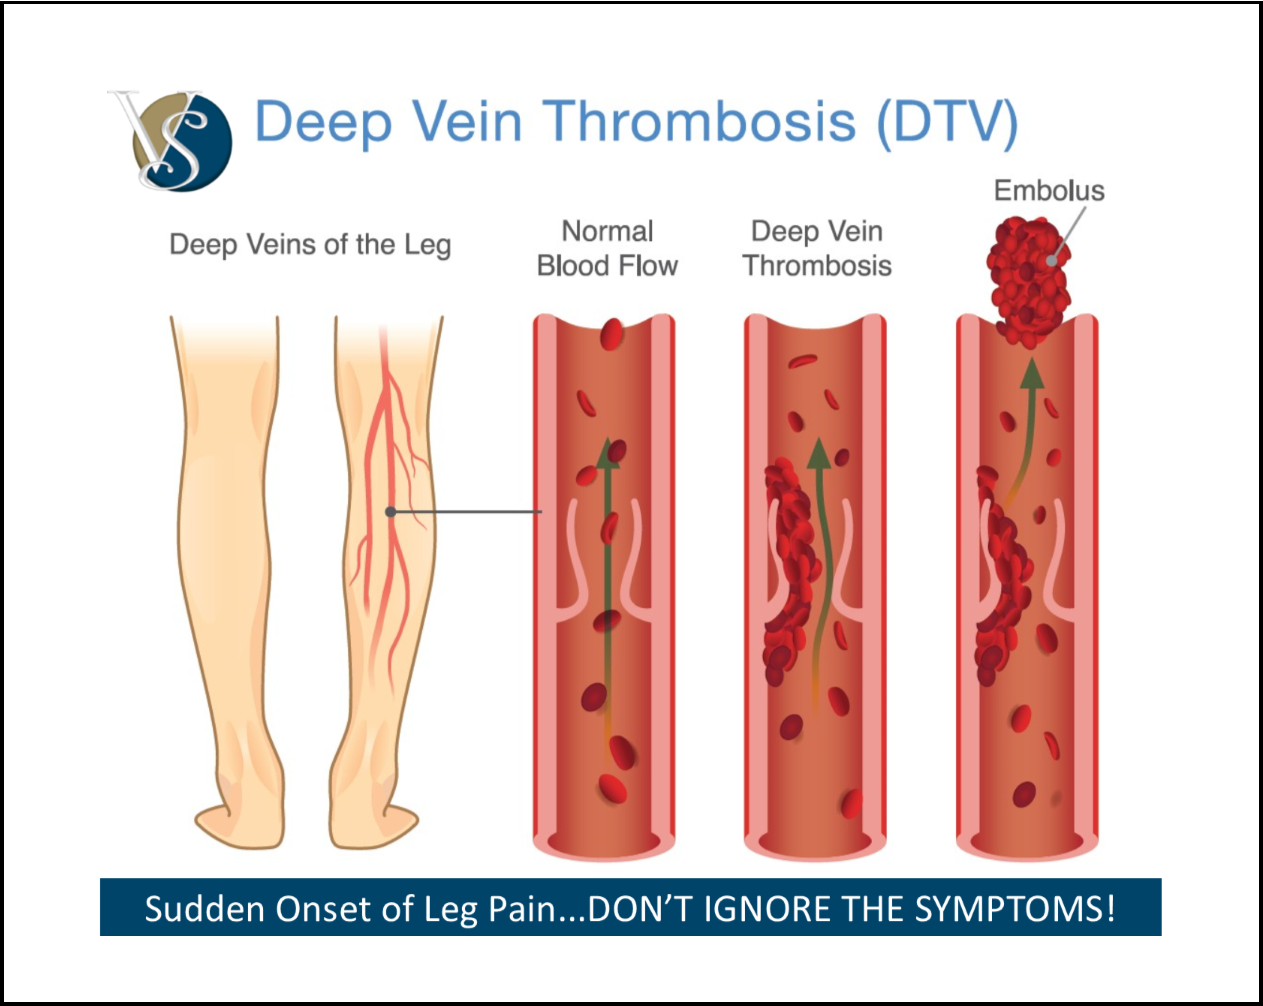 DVT “Deep Vein Thrombosis” Is Usually A Condition That Starts In The Leg…